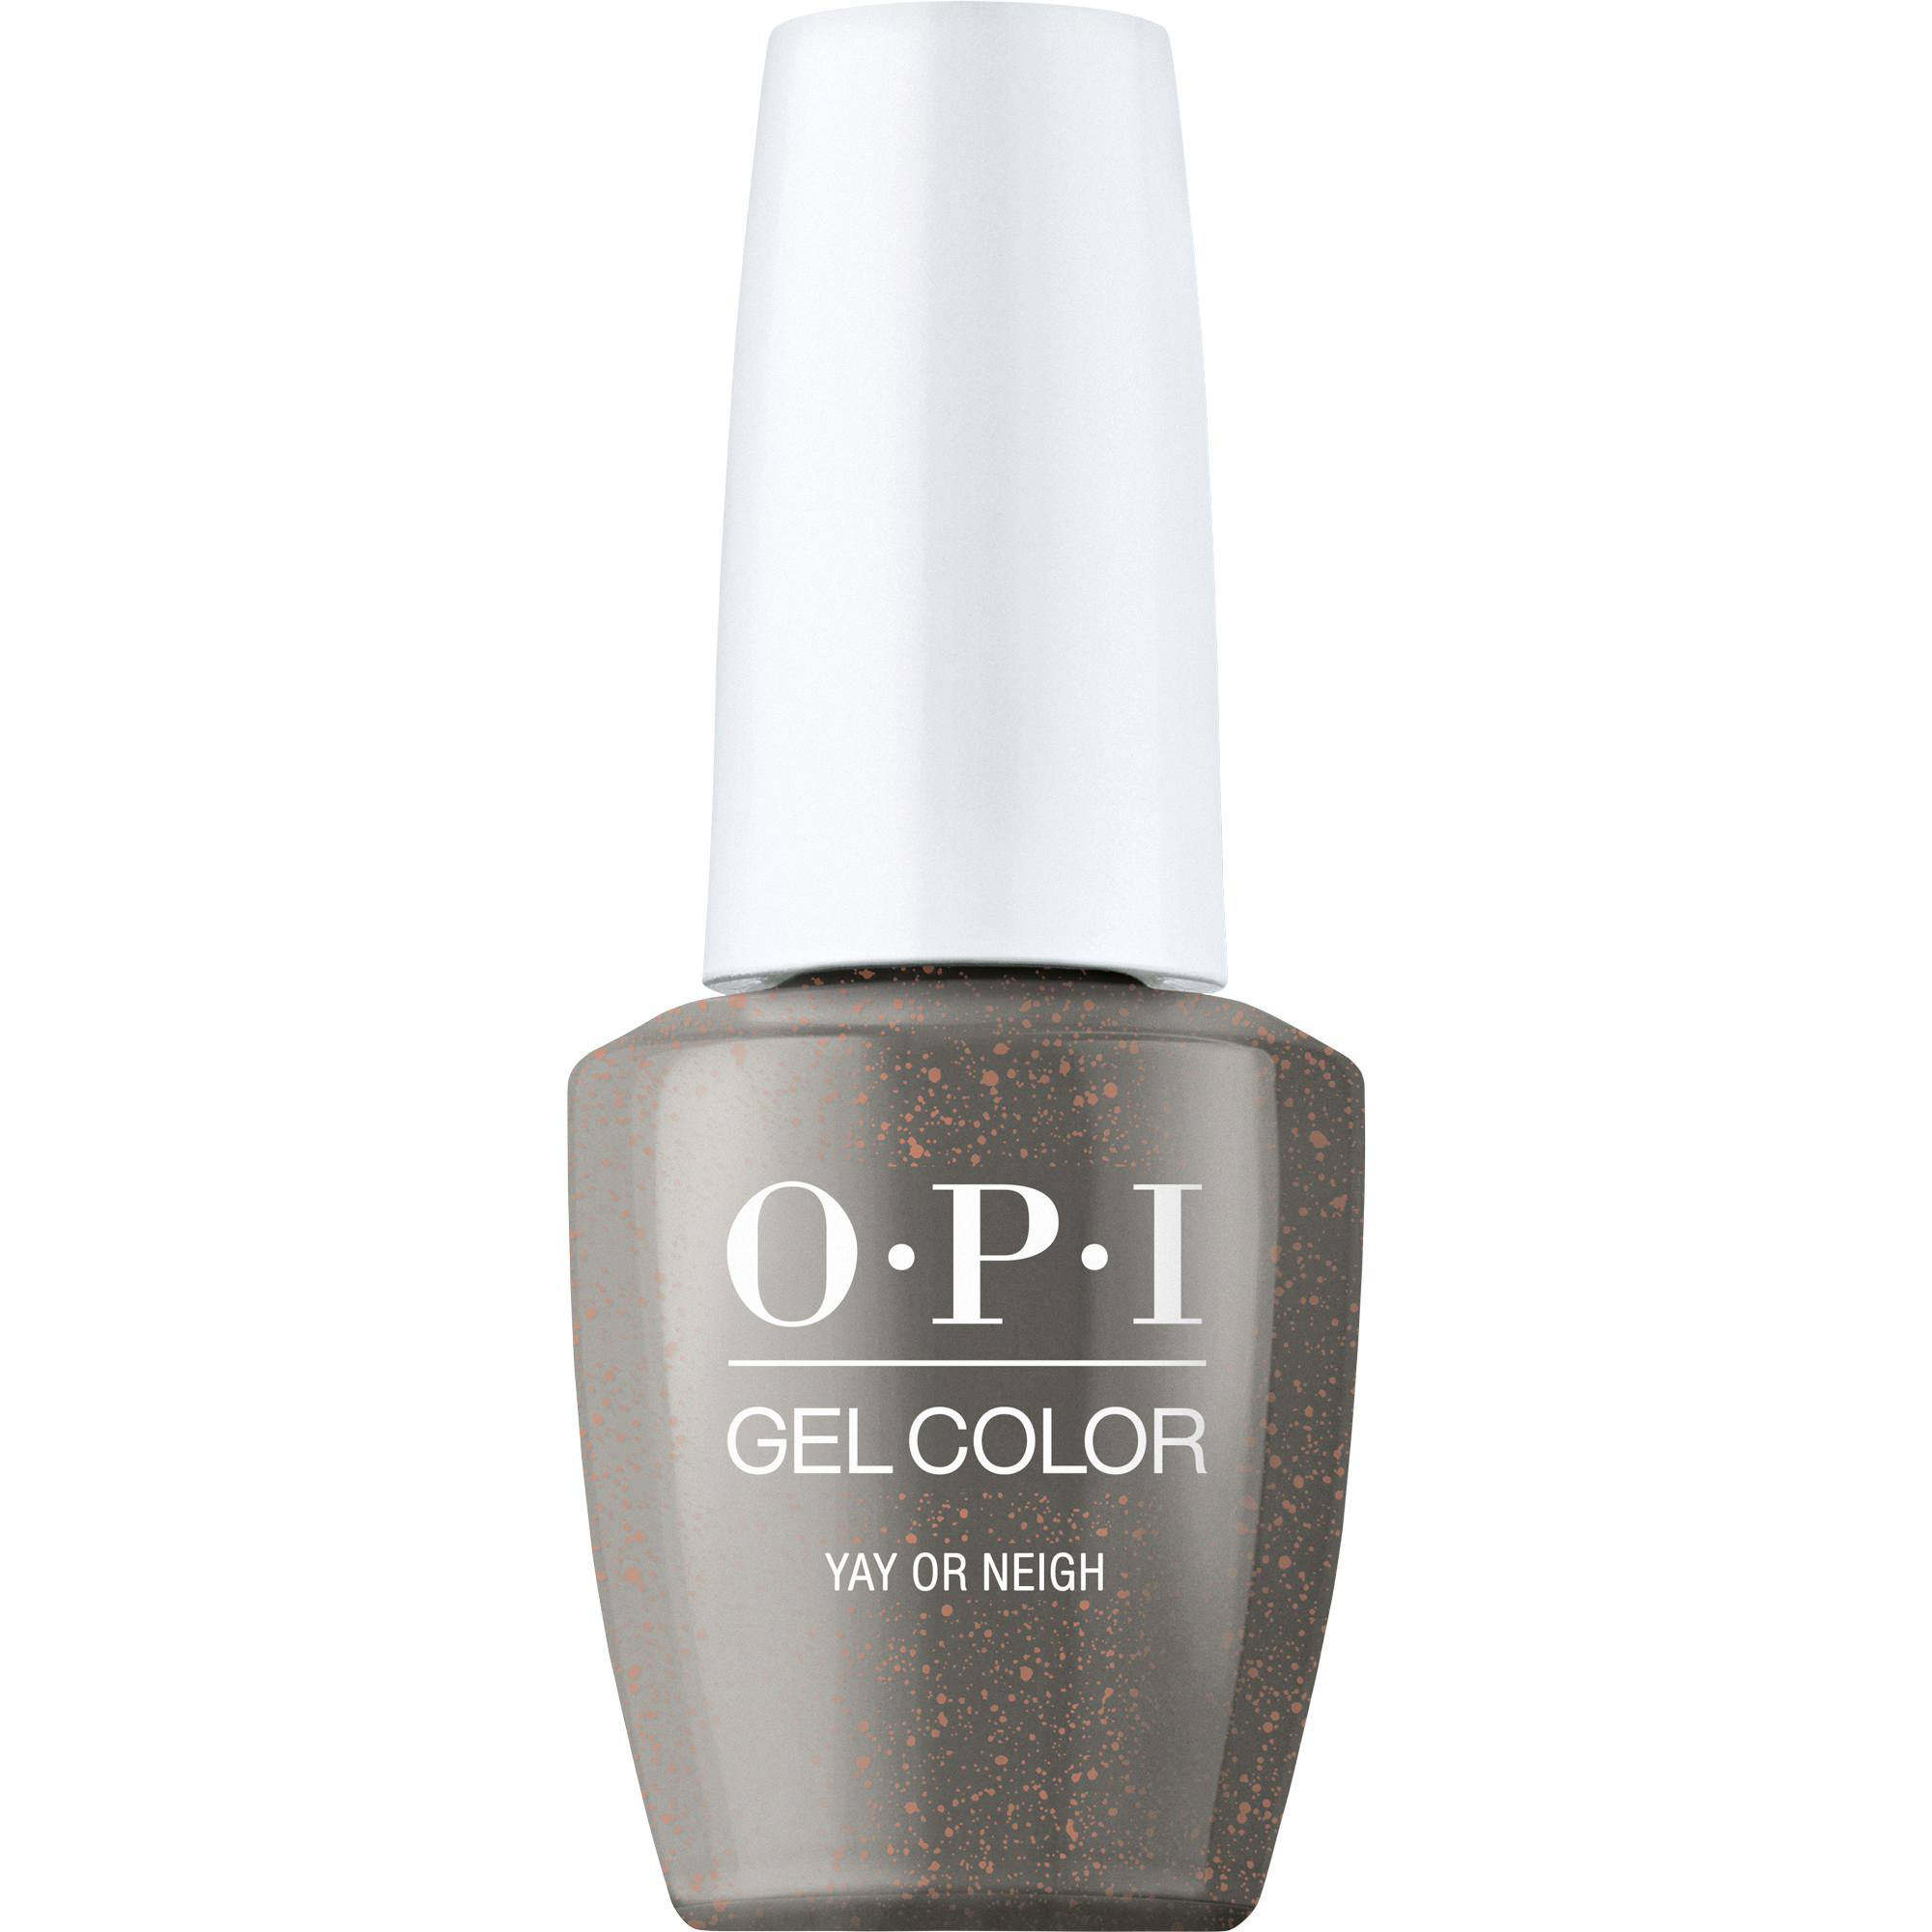 OPI Gel Color 360 - Yay or Neigh